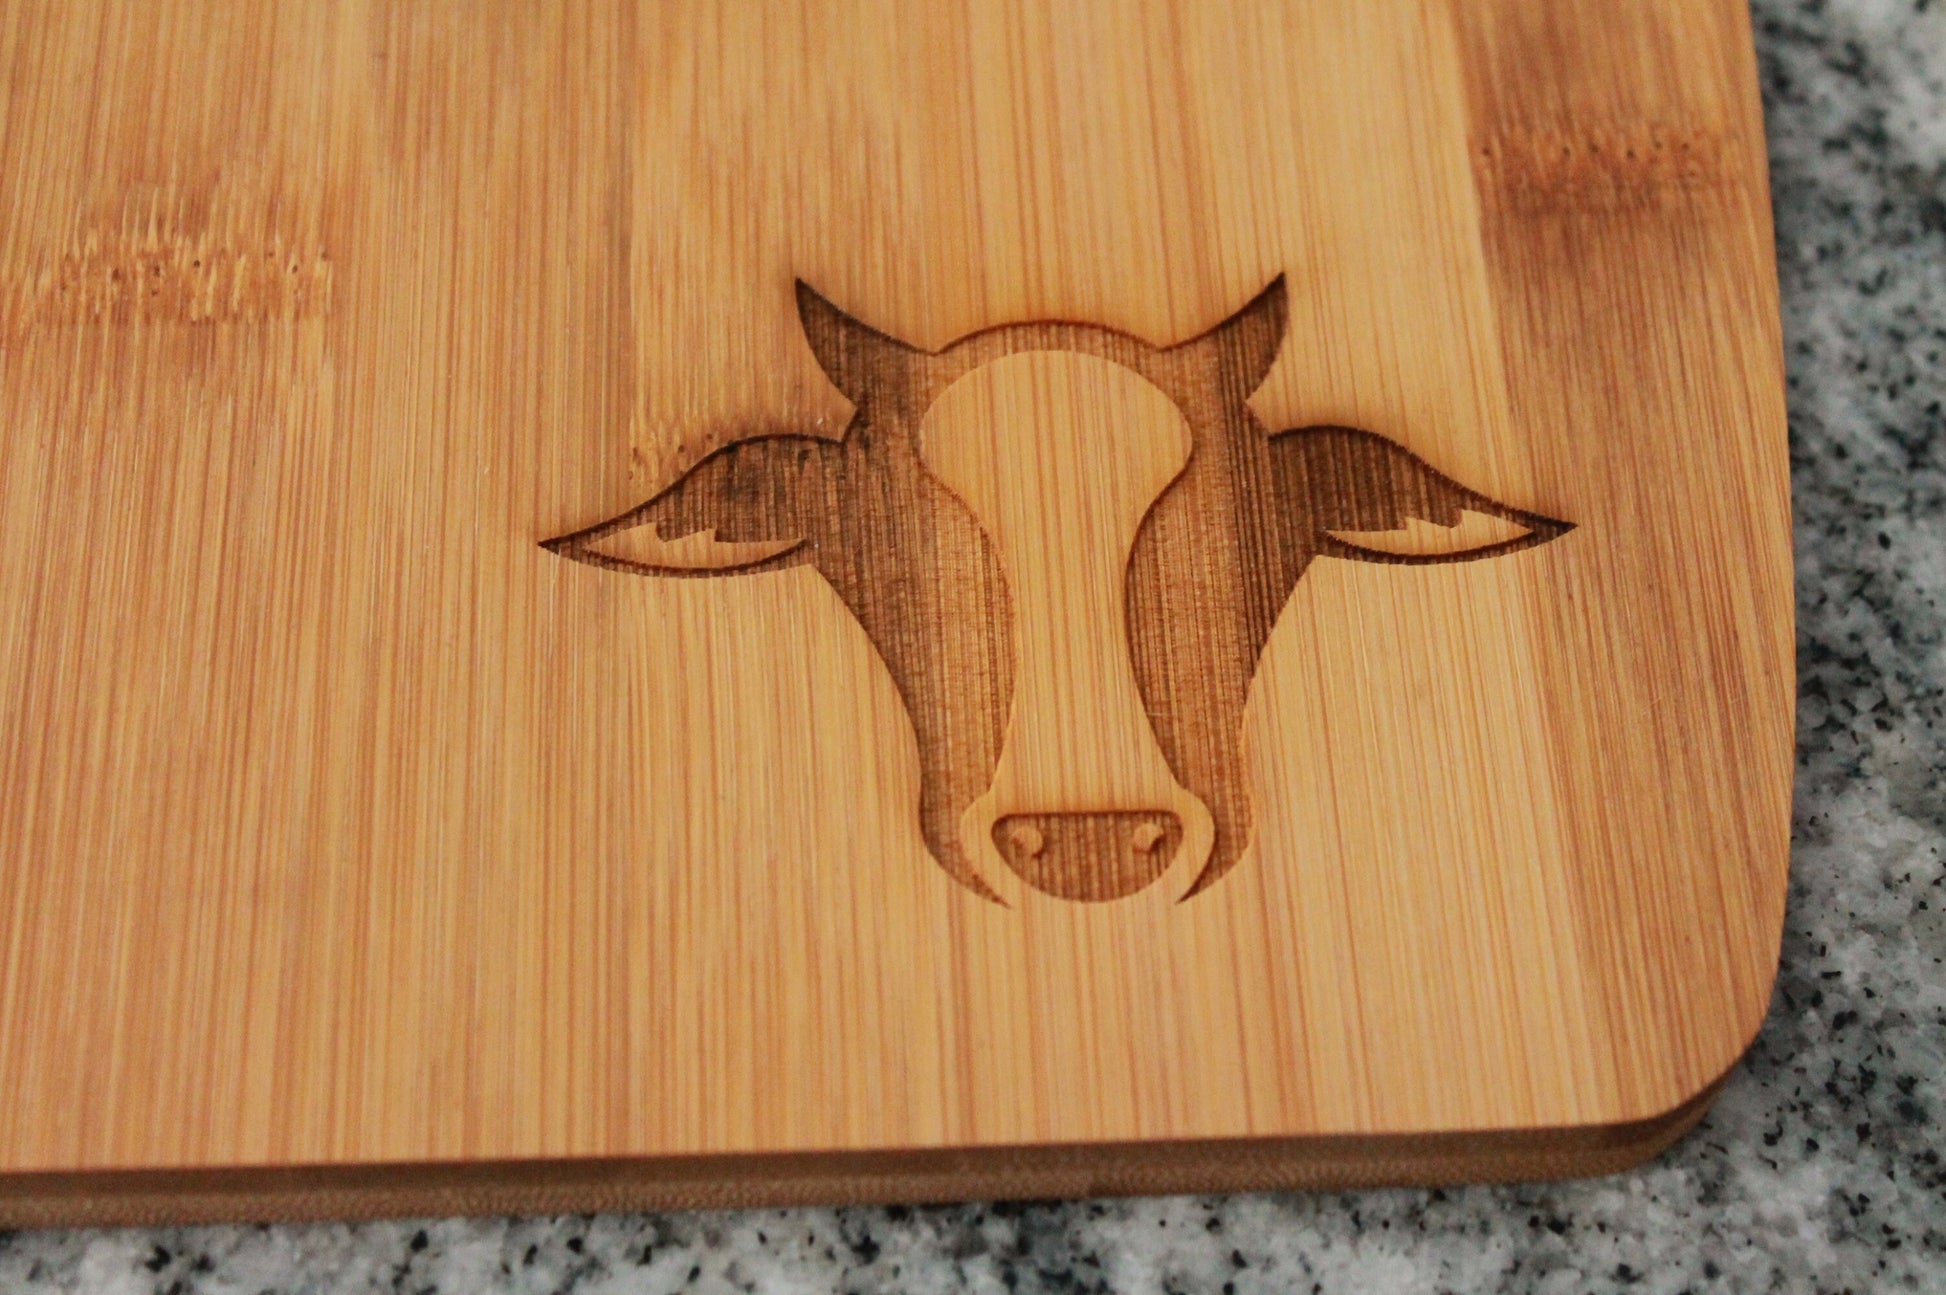 Wooden Engraved Cutting Board Cow Heifer Kitchen Cow Animal Lover Hostess Housewarming Gift Culinary Hardwood Farm Life Country Rustic